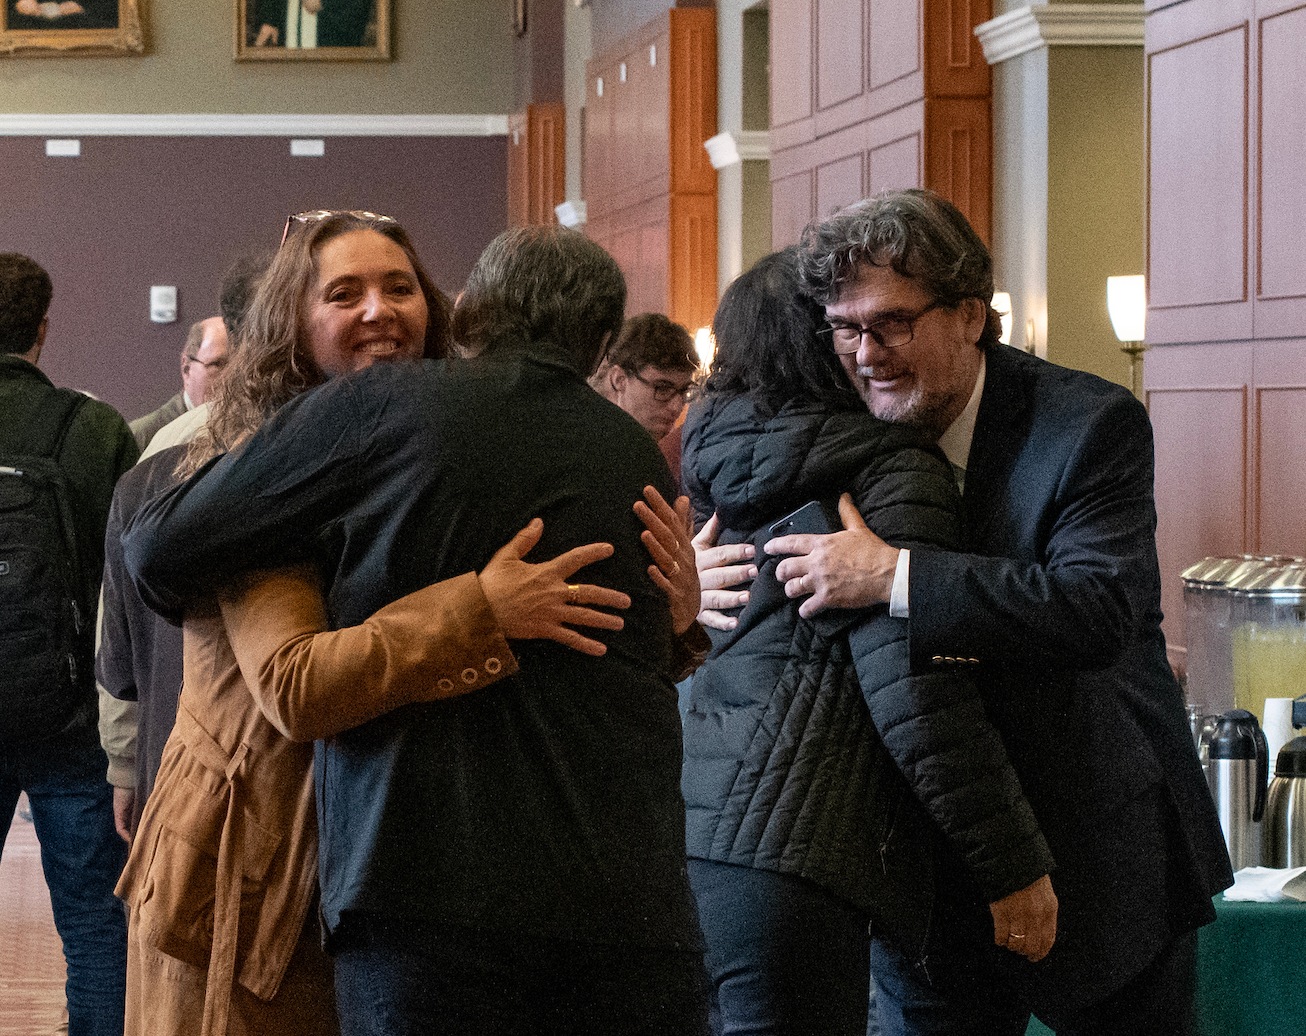 Srdjan Nesic, professor in the Russ College of Engineering and Technology and director of the Institute for Corrosion and Multiphase Flow Technology, and his wife hug attendees at Nesic’s Distinguished Professor Lecture and Portrait Unveiling at the Baker Ballroom in Athens, Ohio.